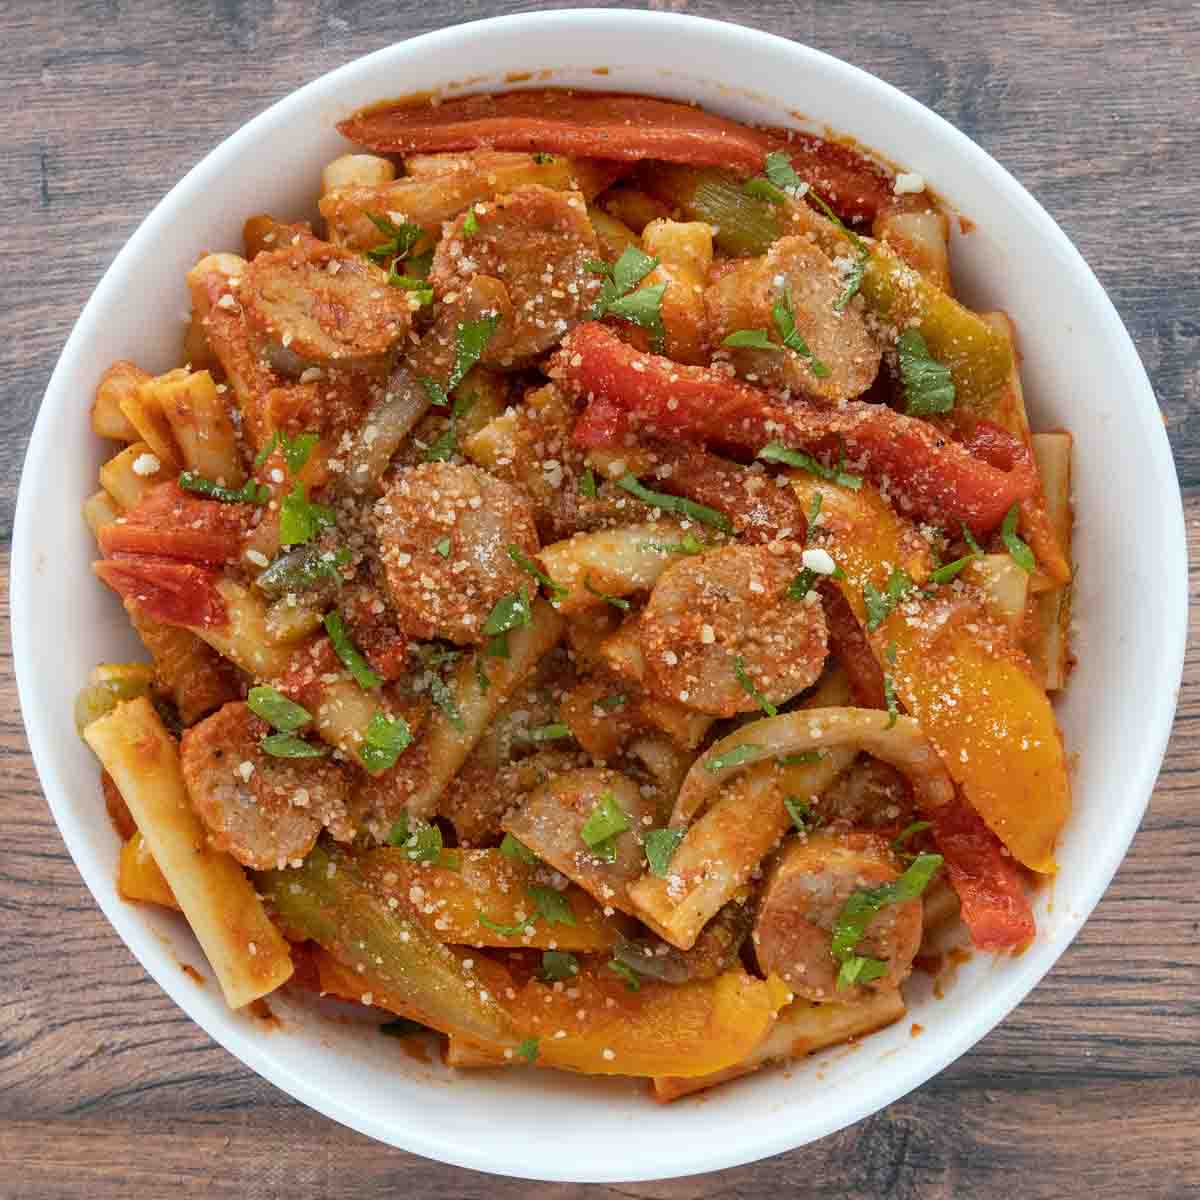 Sausage, peppers and onions with pasta in a white bowl.